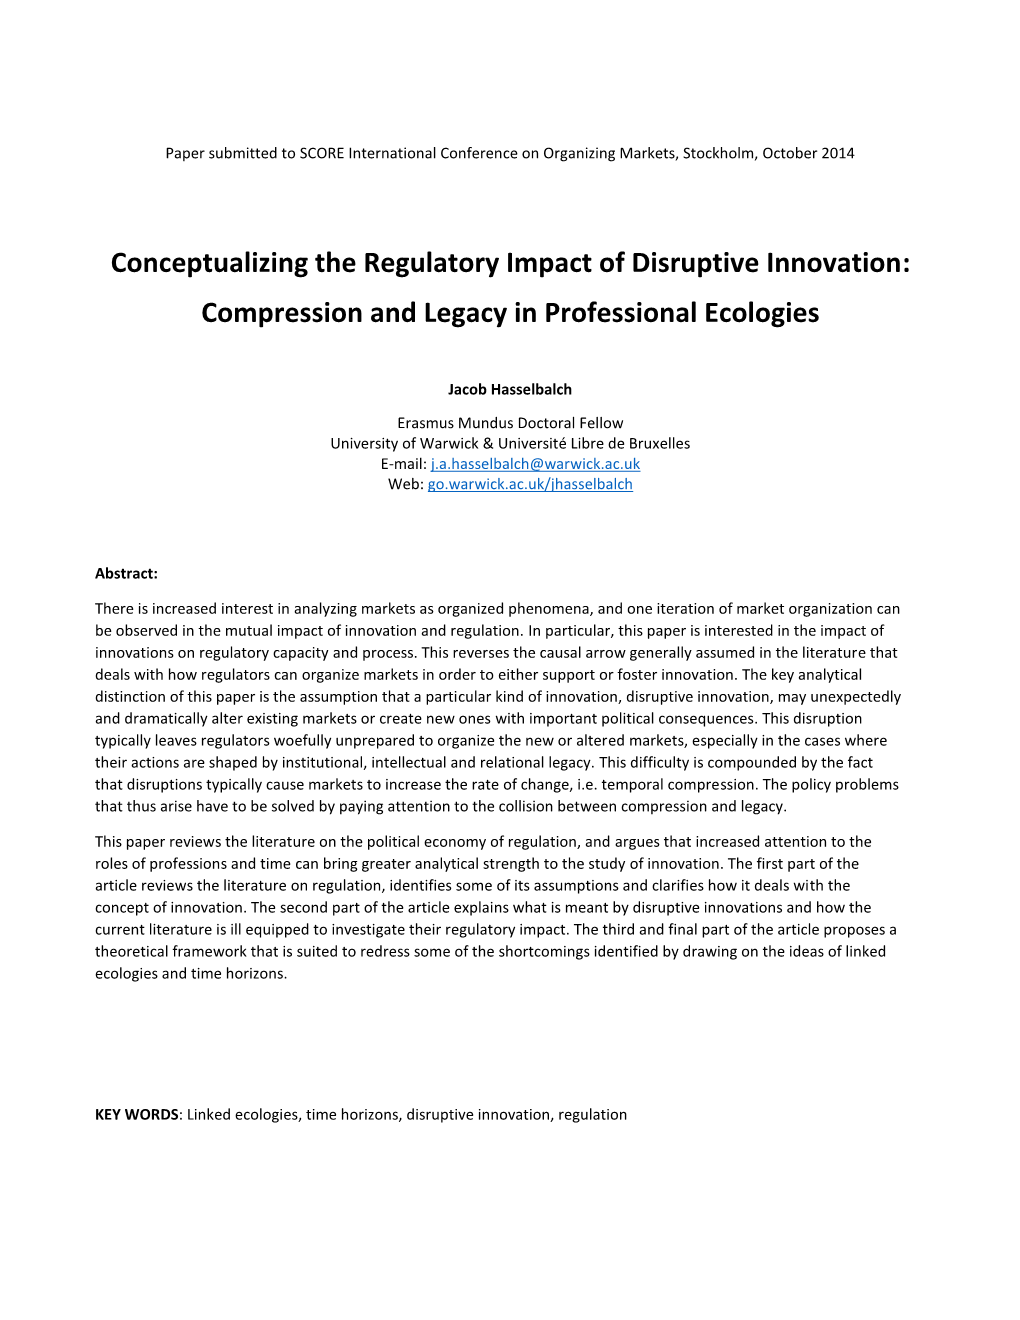 Conceptualizing the Regulatory Impact of Disruptive Innovation: Compression and Legacy in Professional Ecologies